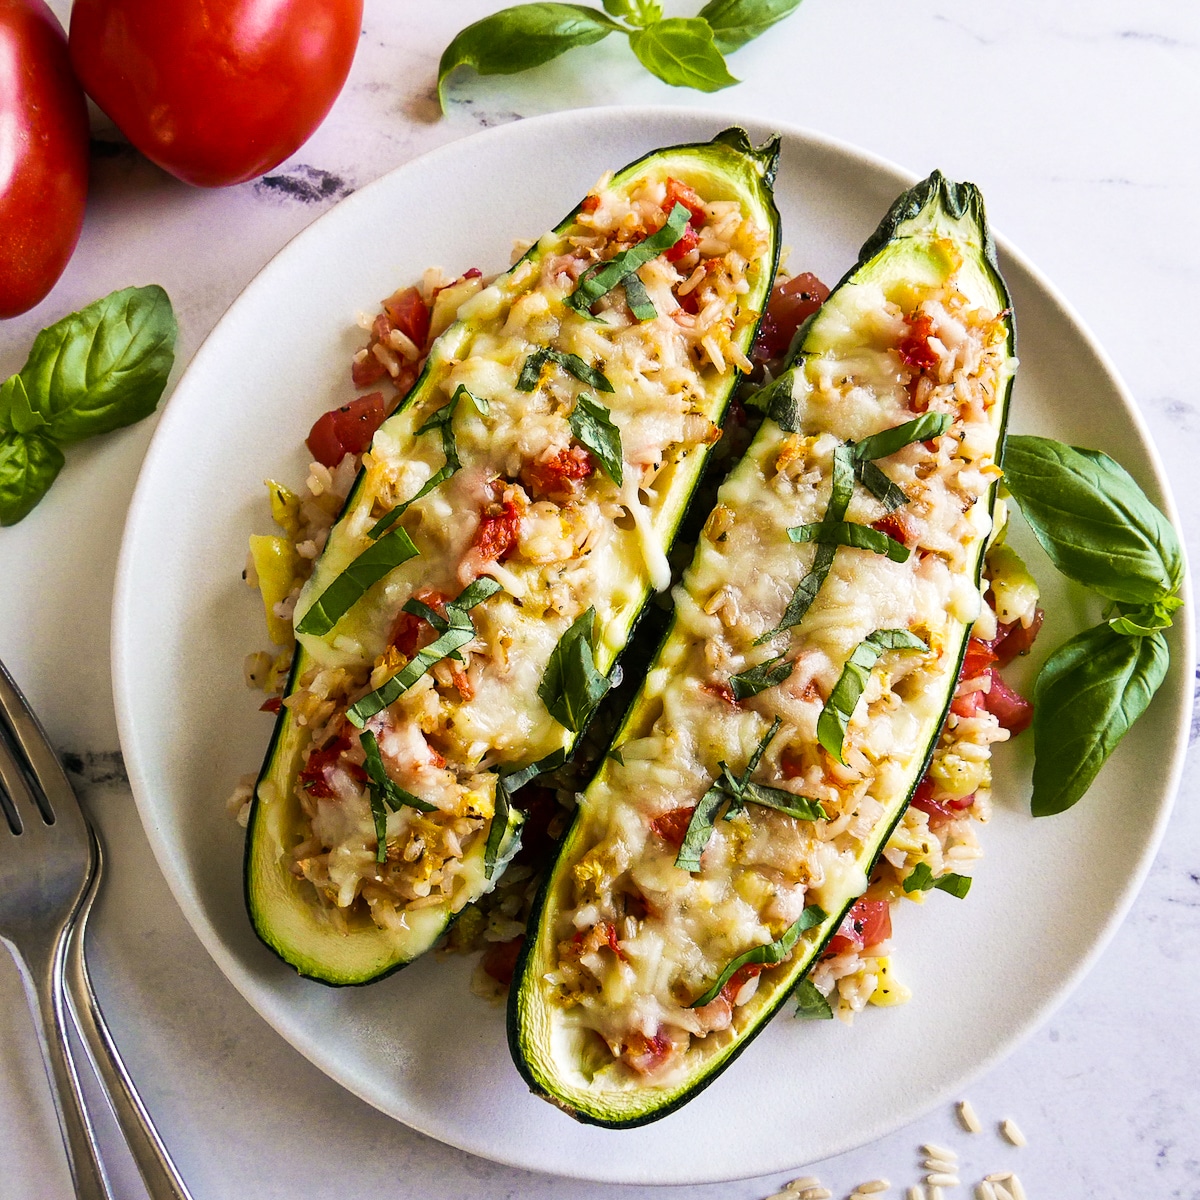 Two pieces of stuffed zucchini arranged on a white plate.